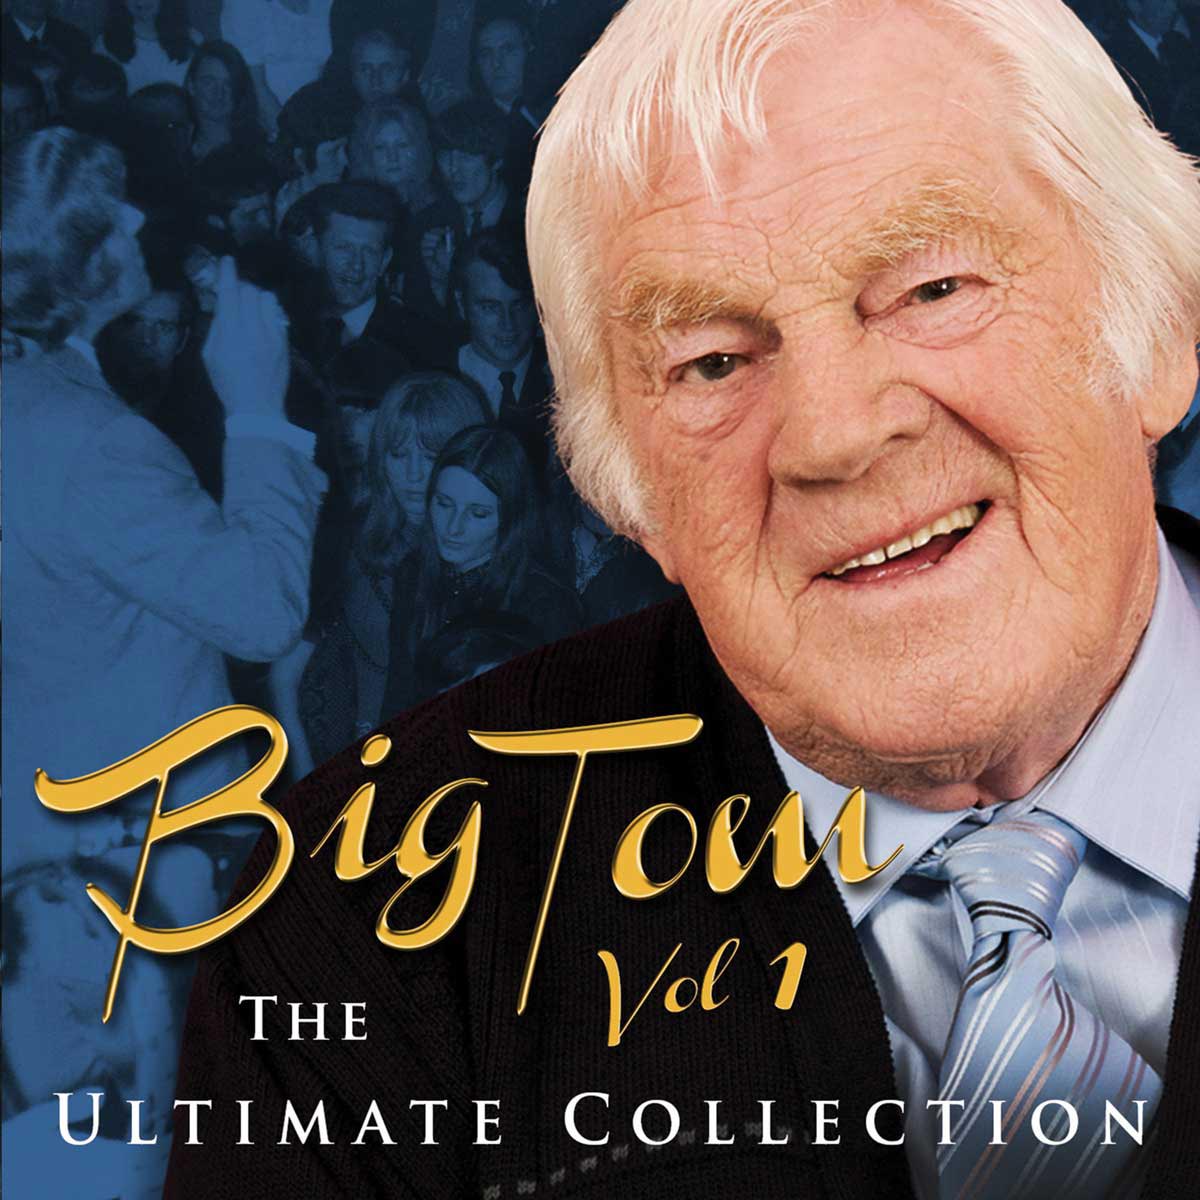 Big Tom The Ultimate Collection Vol 1 New Double CD Compilation Album